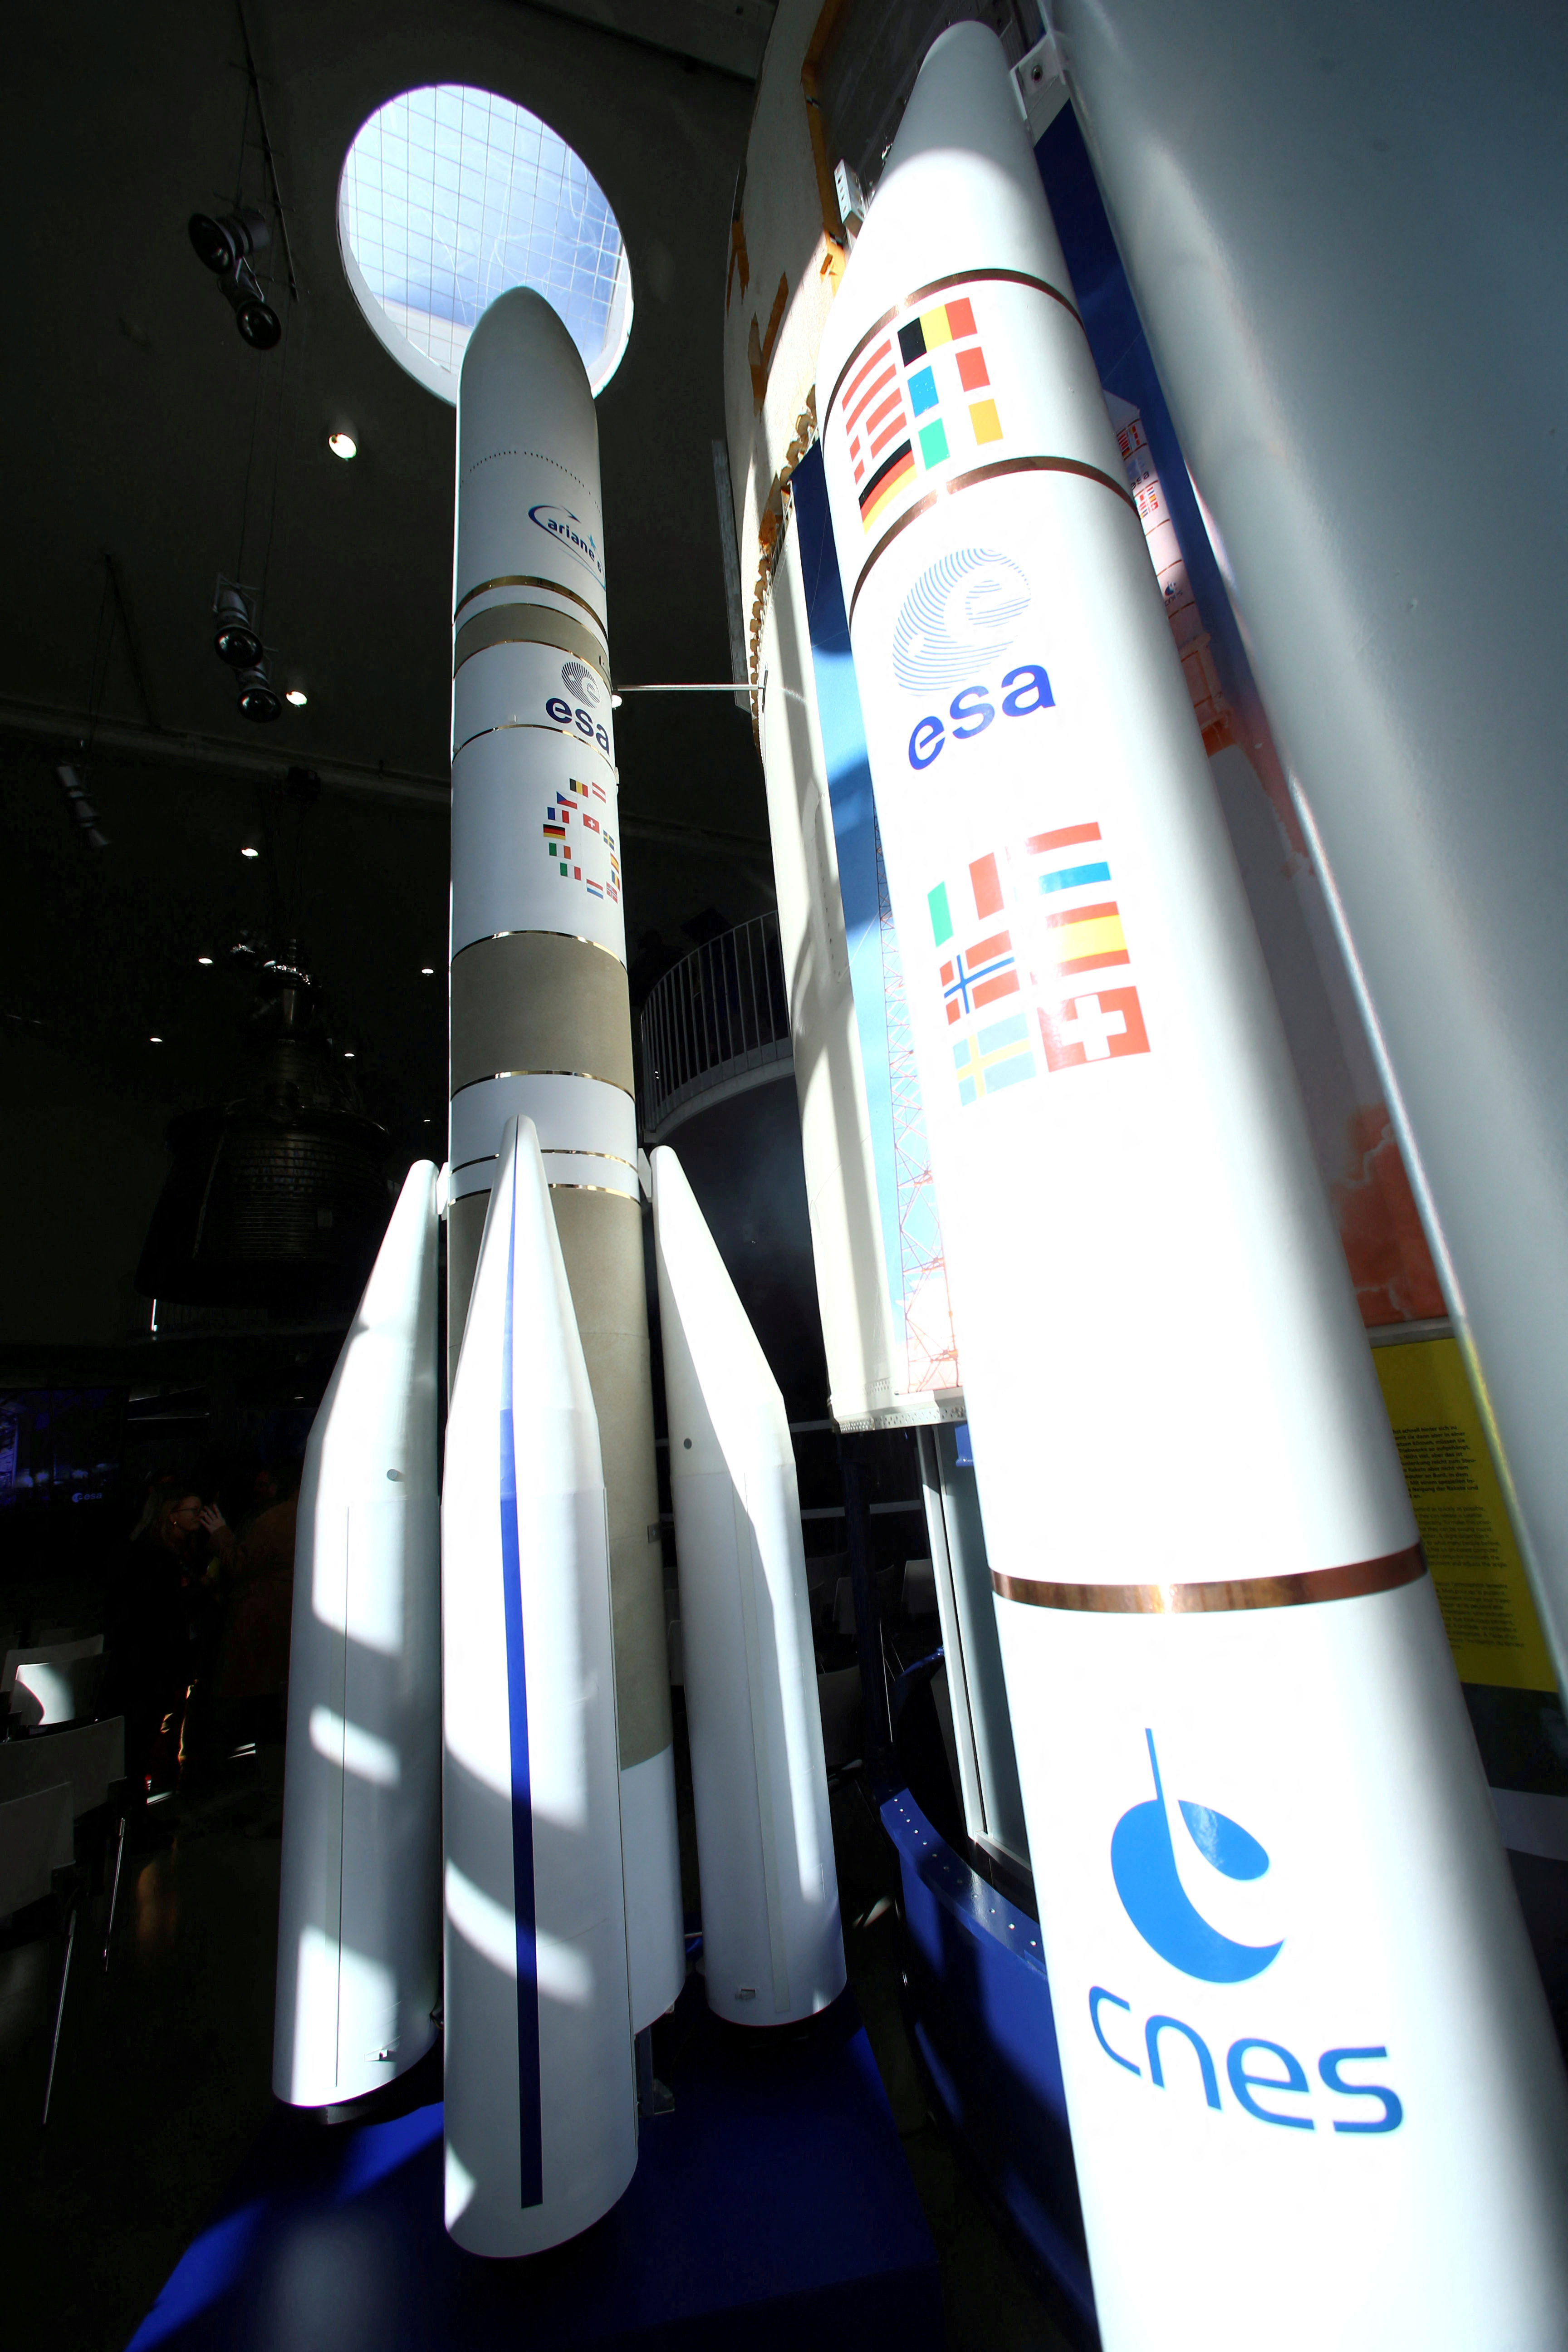 A model of Europe's next-generation space rocket Ariane 6 is pictured at the DLR in Lampoldshausen